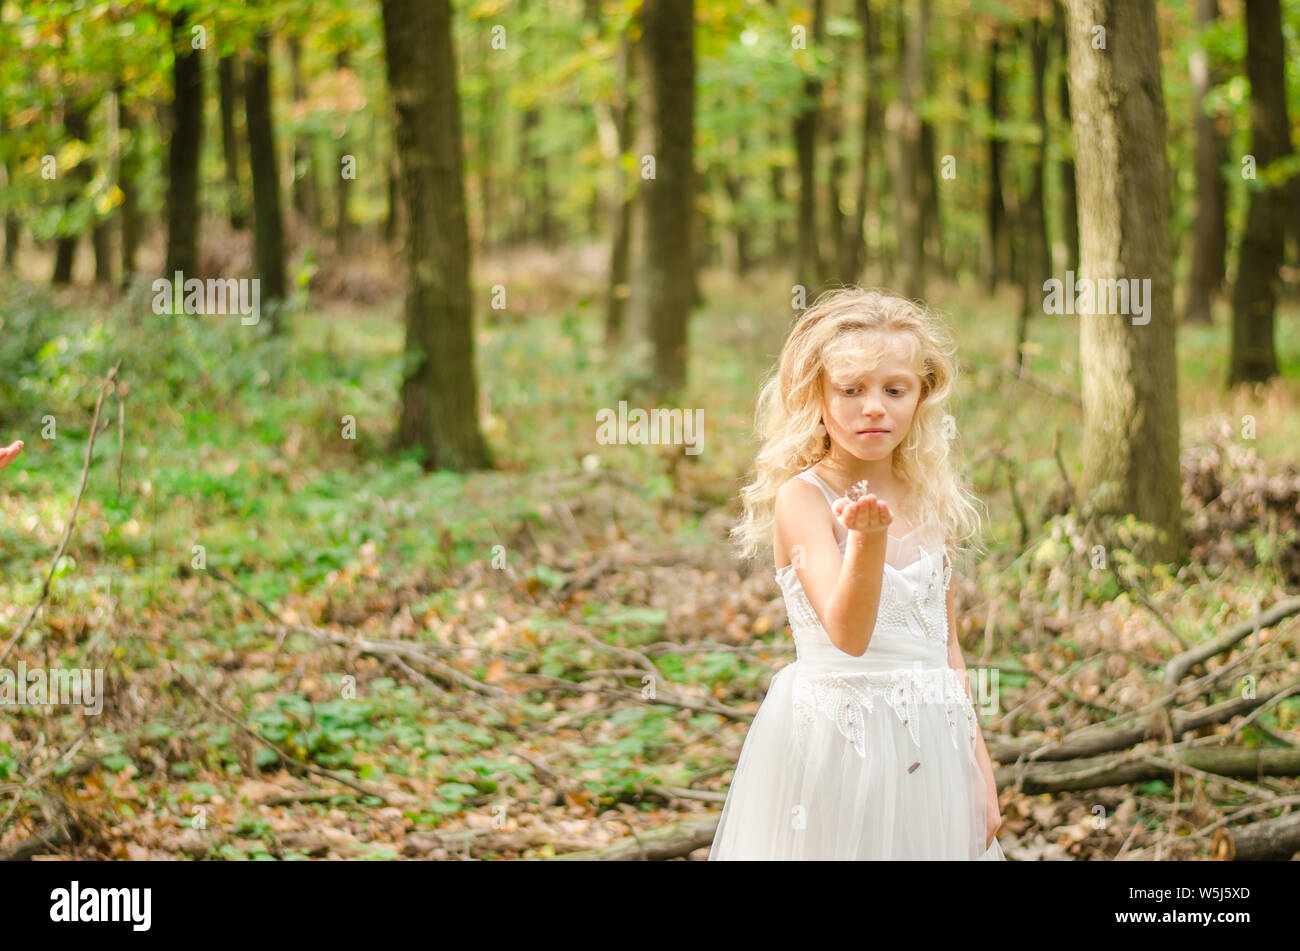 one little girl in dress among autumnal trees in forest in golden hour atmosphere Stock Photo